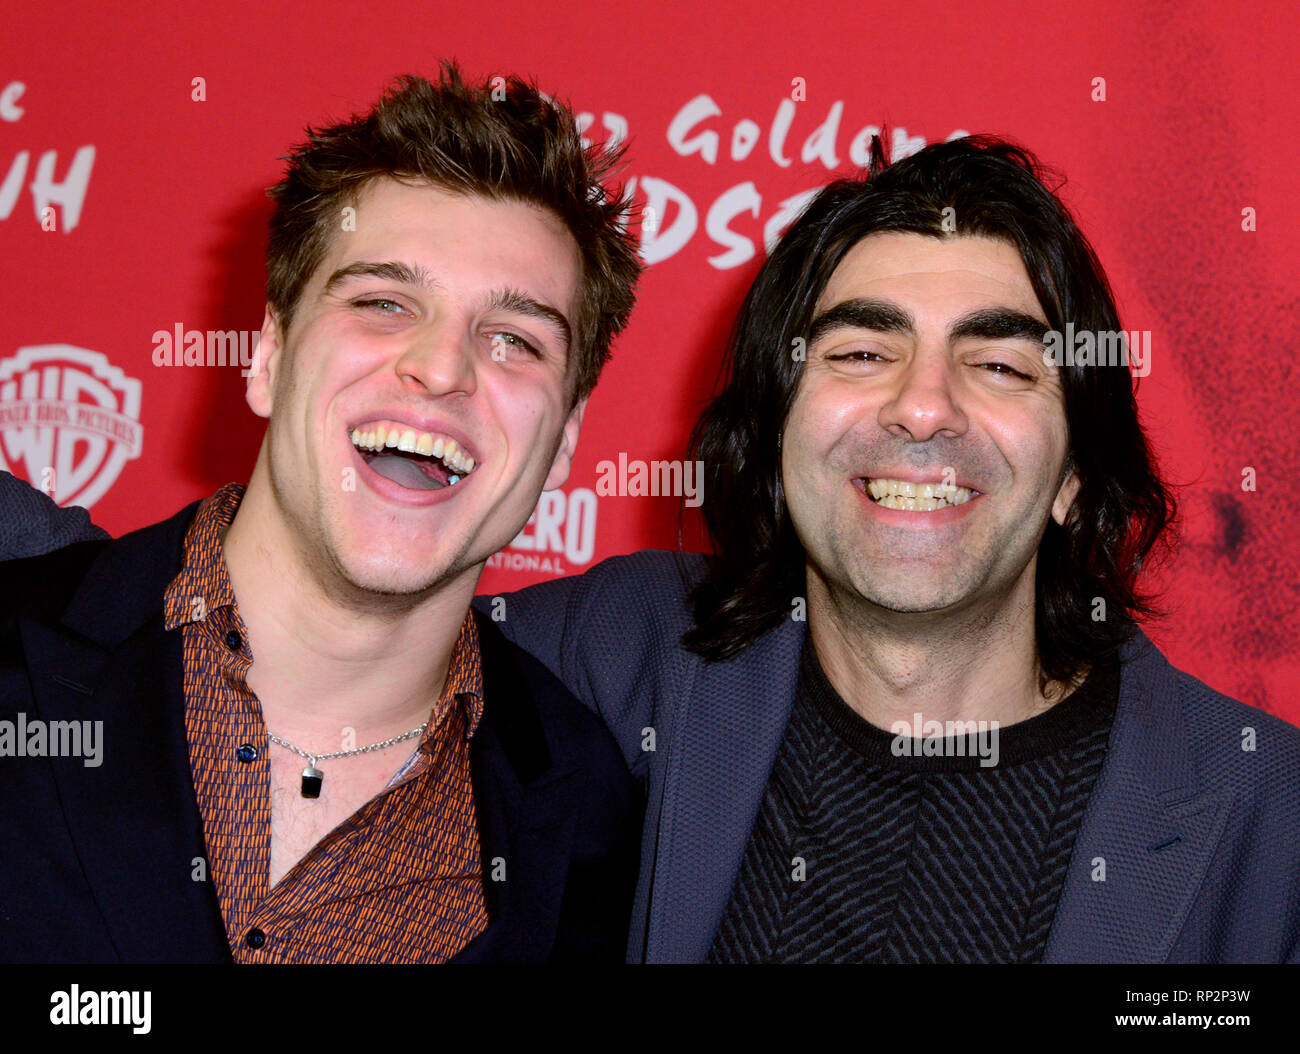 Hamburg, Germany. 20th Feb, 2019. Jonas Dassler (l), actor, and Fatih Akin, director, come to the premiere of the movie 'The Golden Glove'. Credit: Daniel Bockwoldt/dpa/Alamy Live News Stock Photo